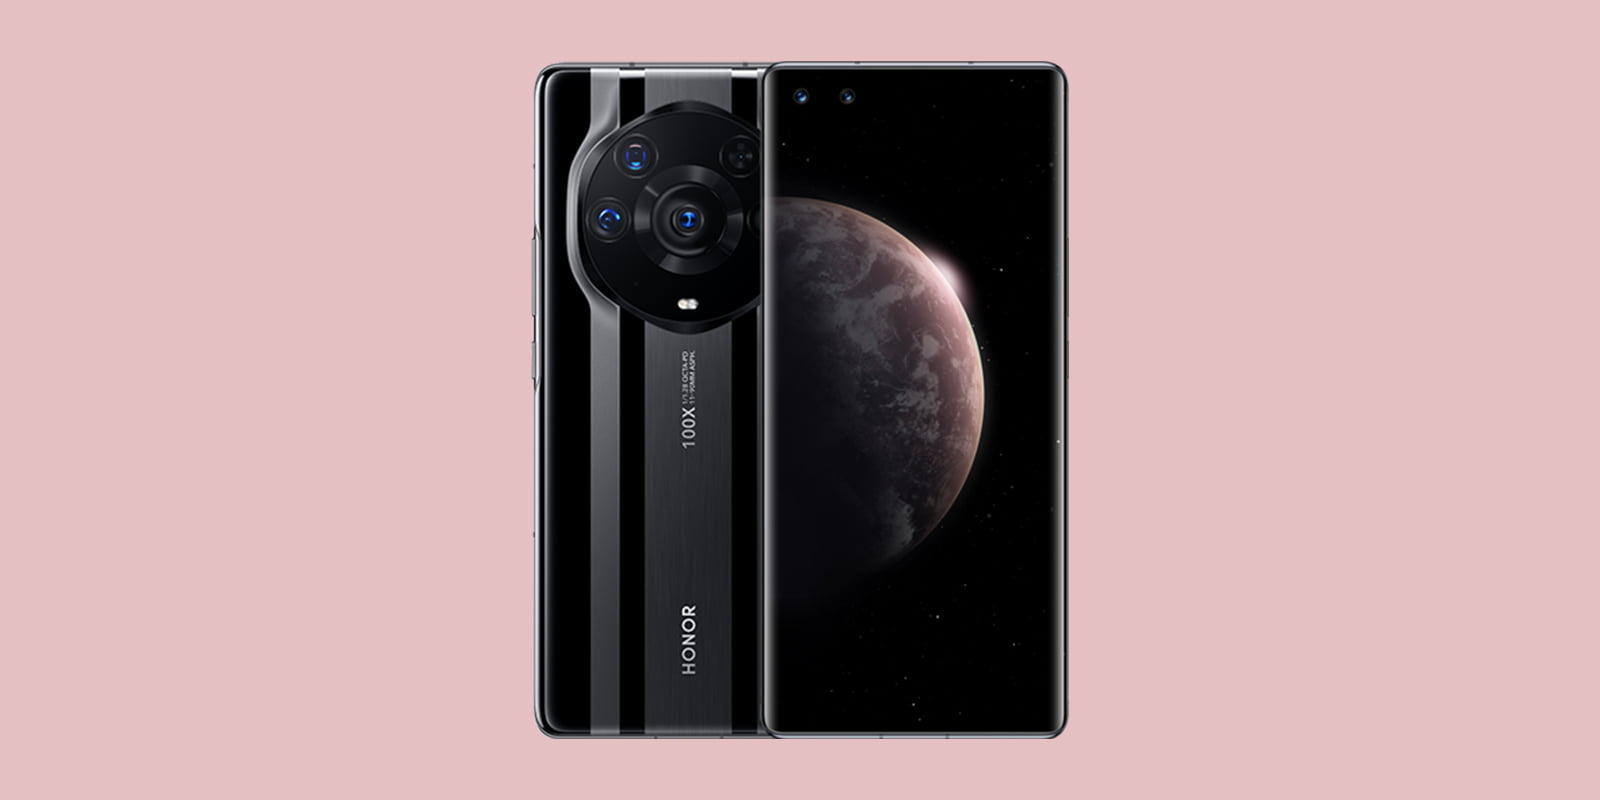 Honor Announces Magic 3 Series, First Phones After Parting Ways With Huawei